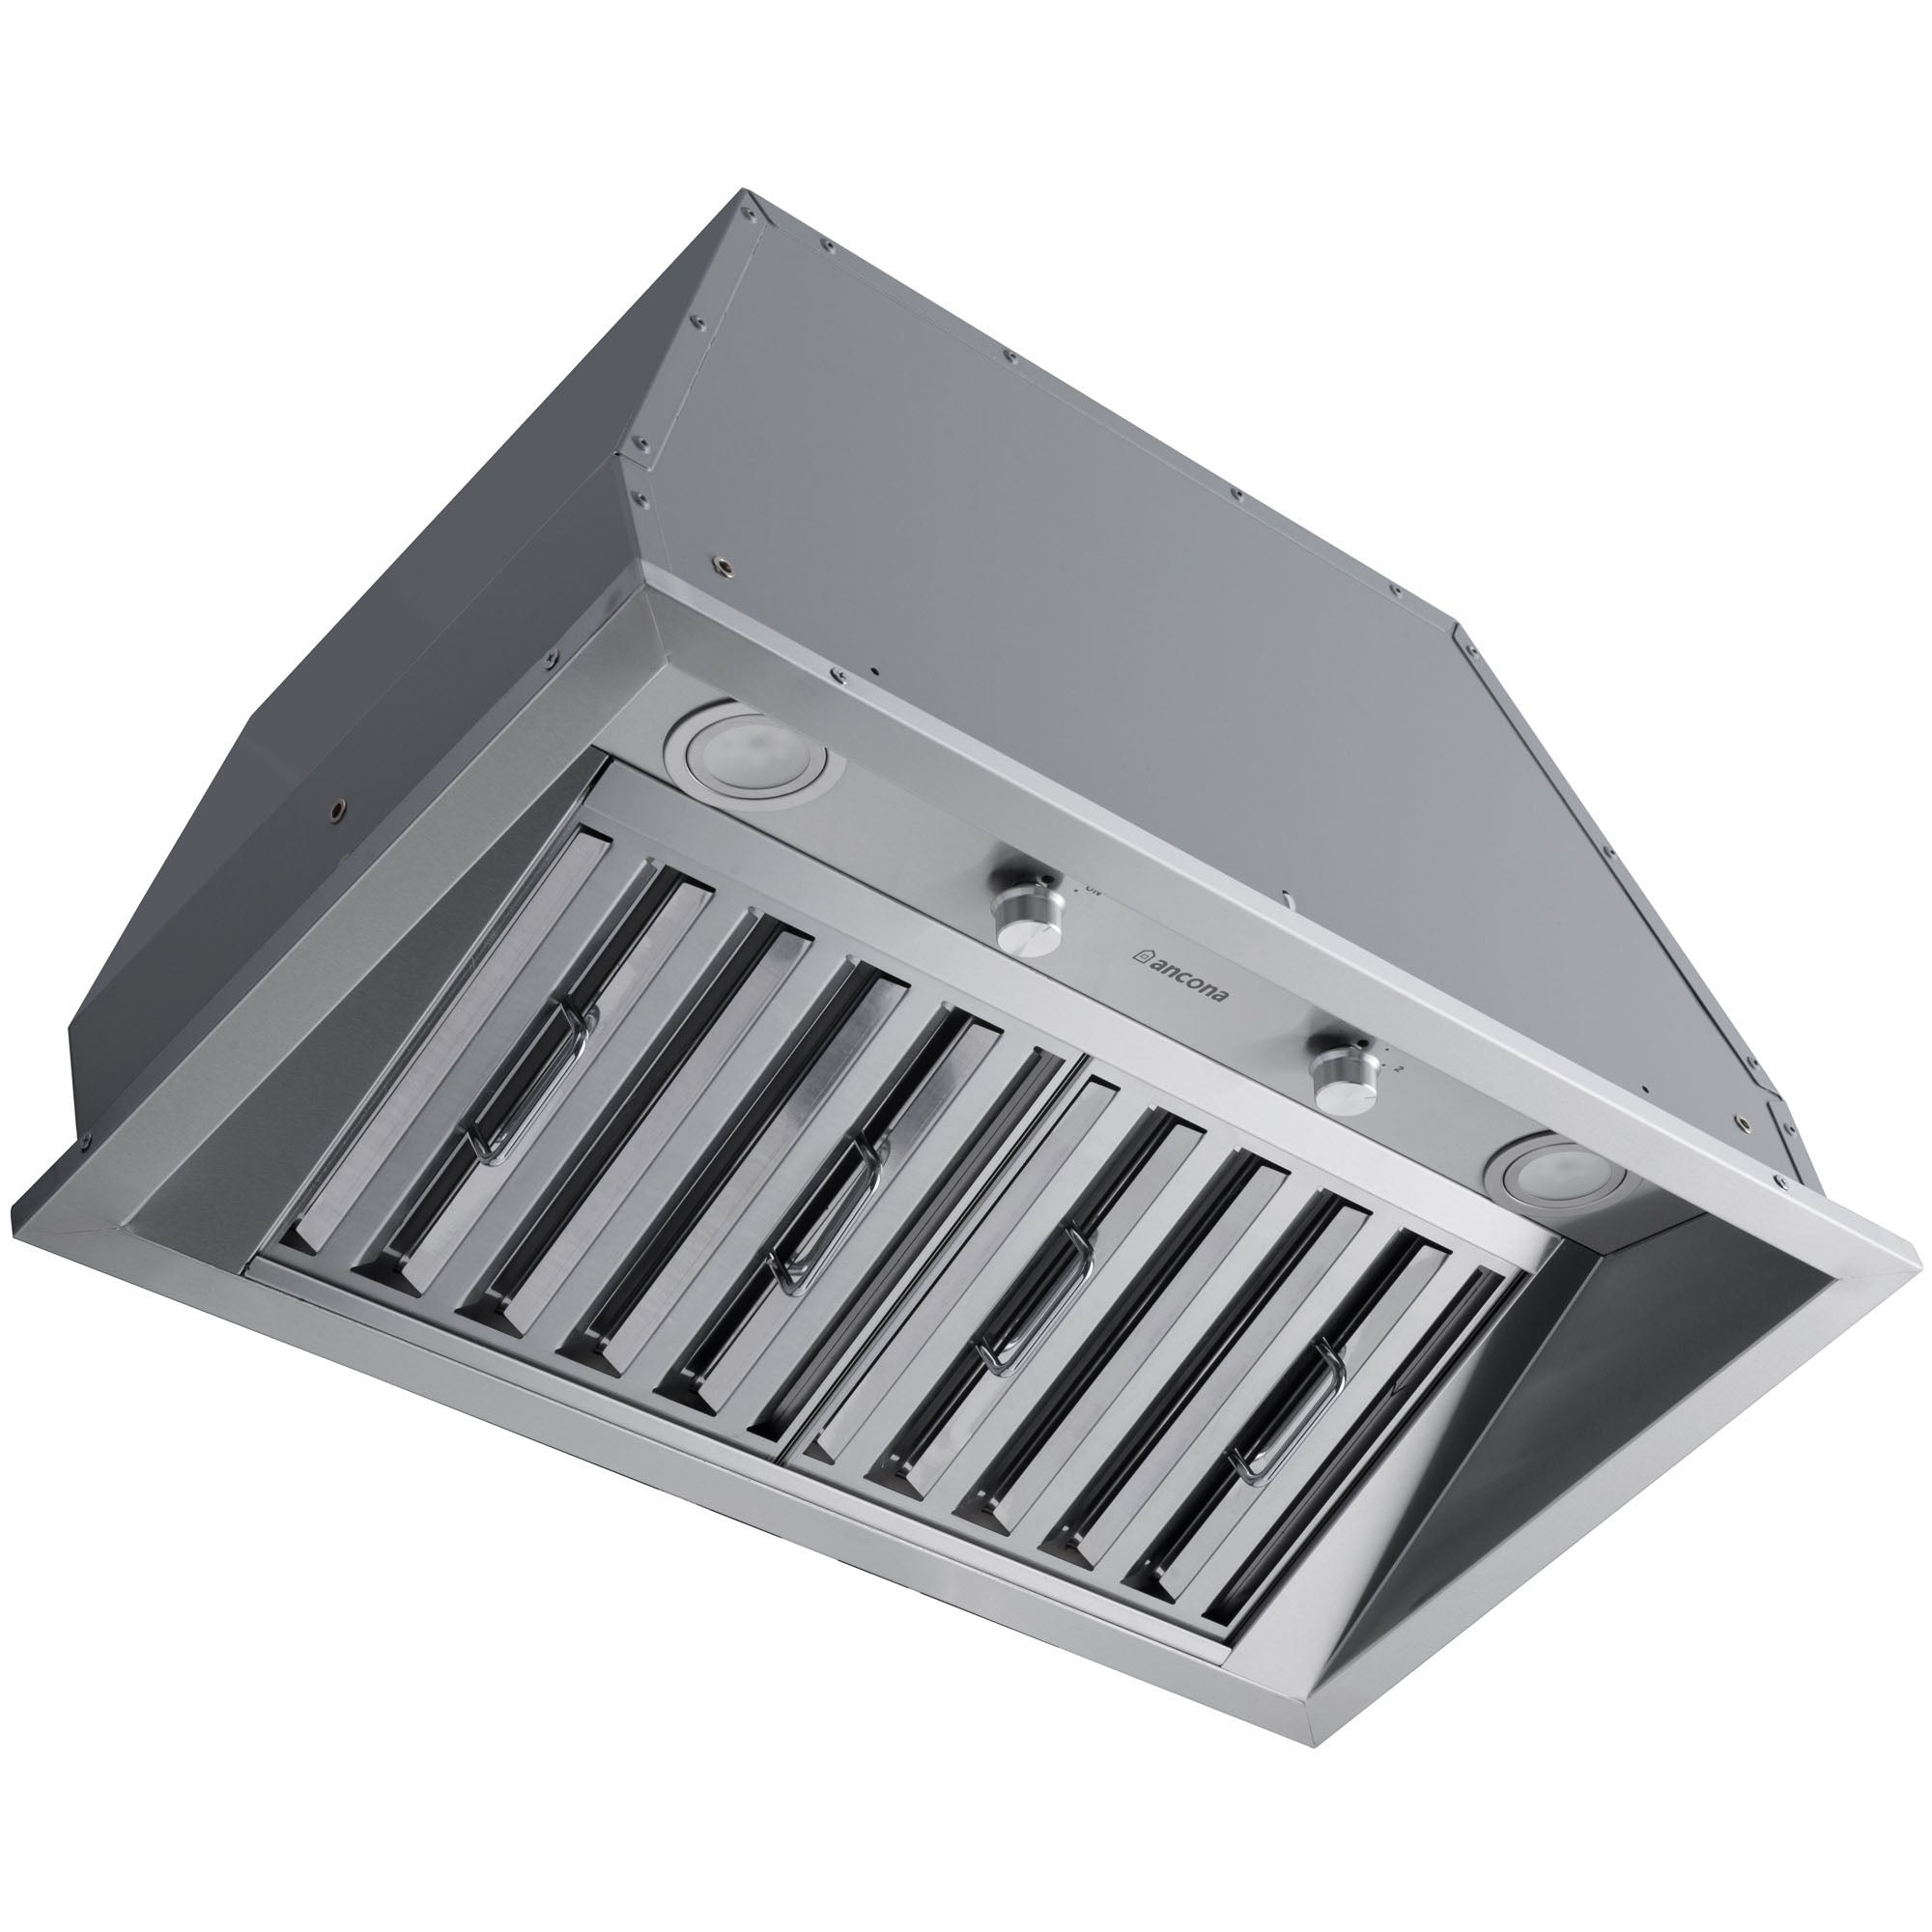 Ancona Pro 28” 600 CFM Ducted Insert Range Hood in Stainless Steel - AN-1329